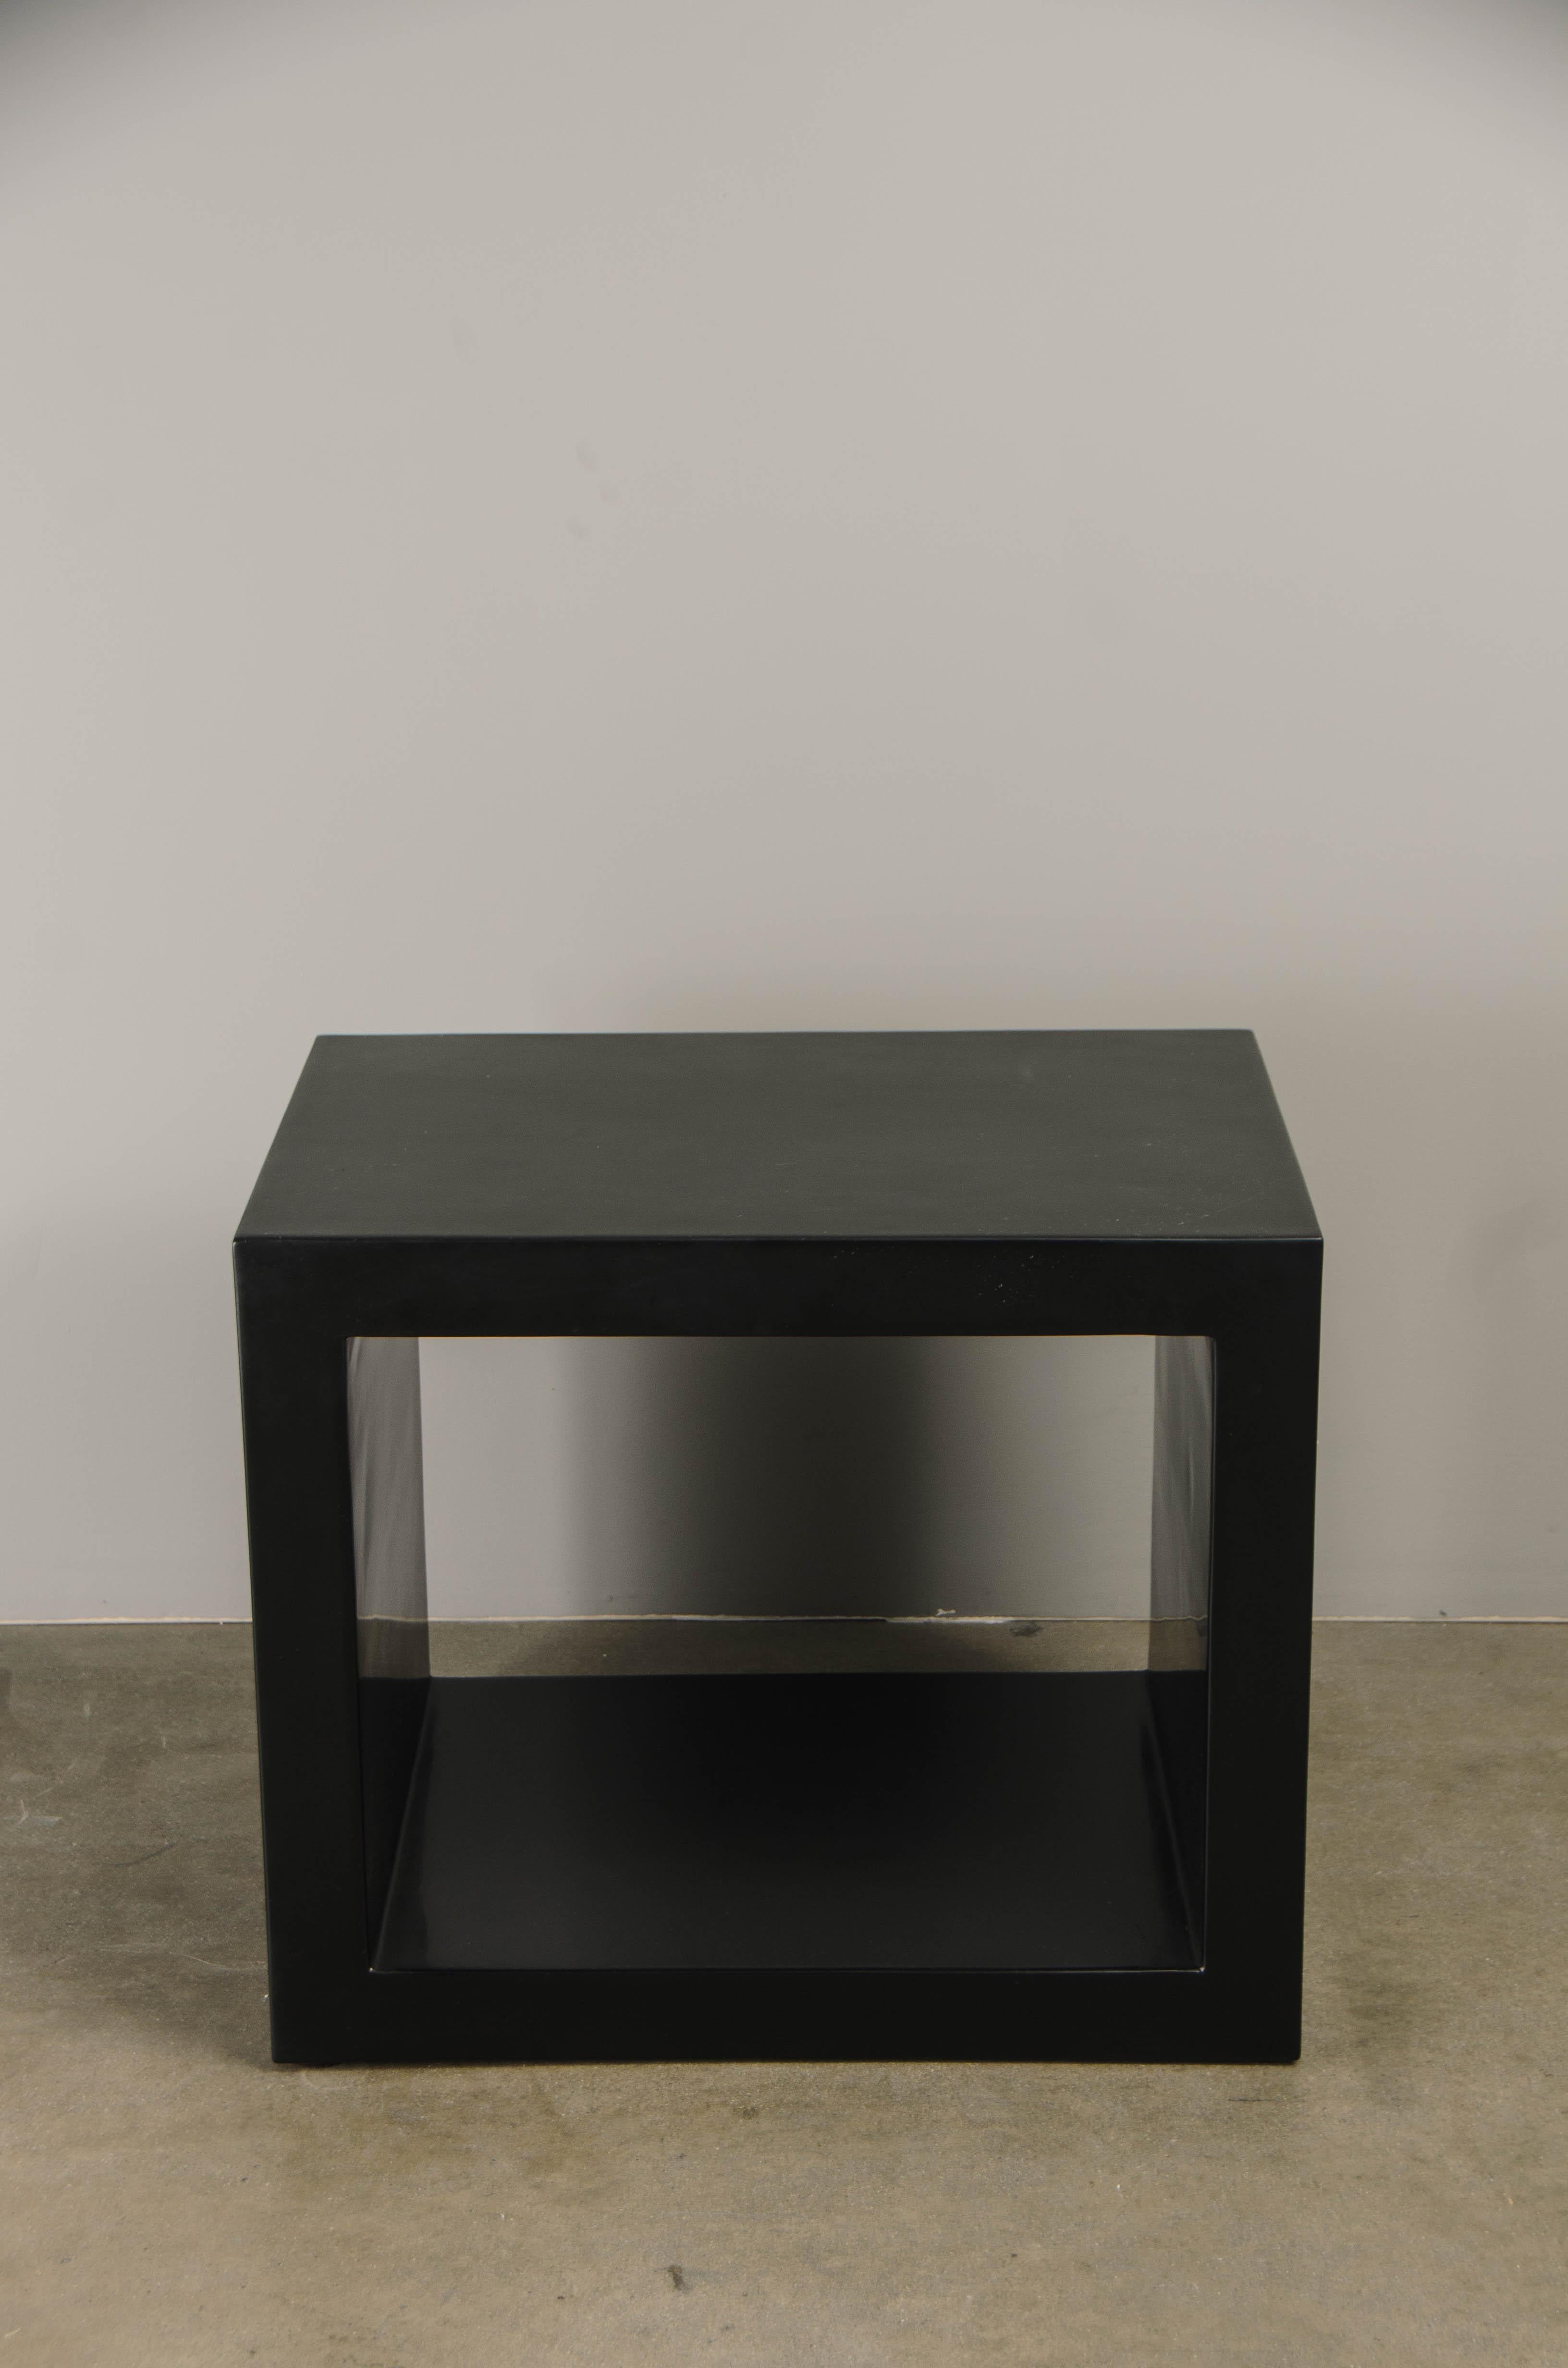 Window Side Table
Black Lacquer
Hand Made
Limited Edition
Contemporary
Each piece is individually crafted and is unique. 

Lacquer is a technique that dates back to the Shang dynasty, circa 1600-1100 B.C. These pieces are made with at least